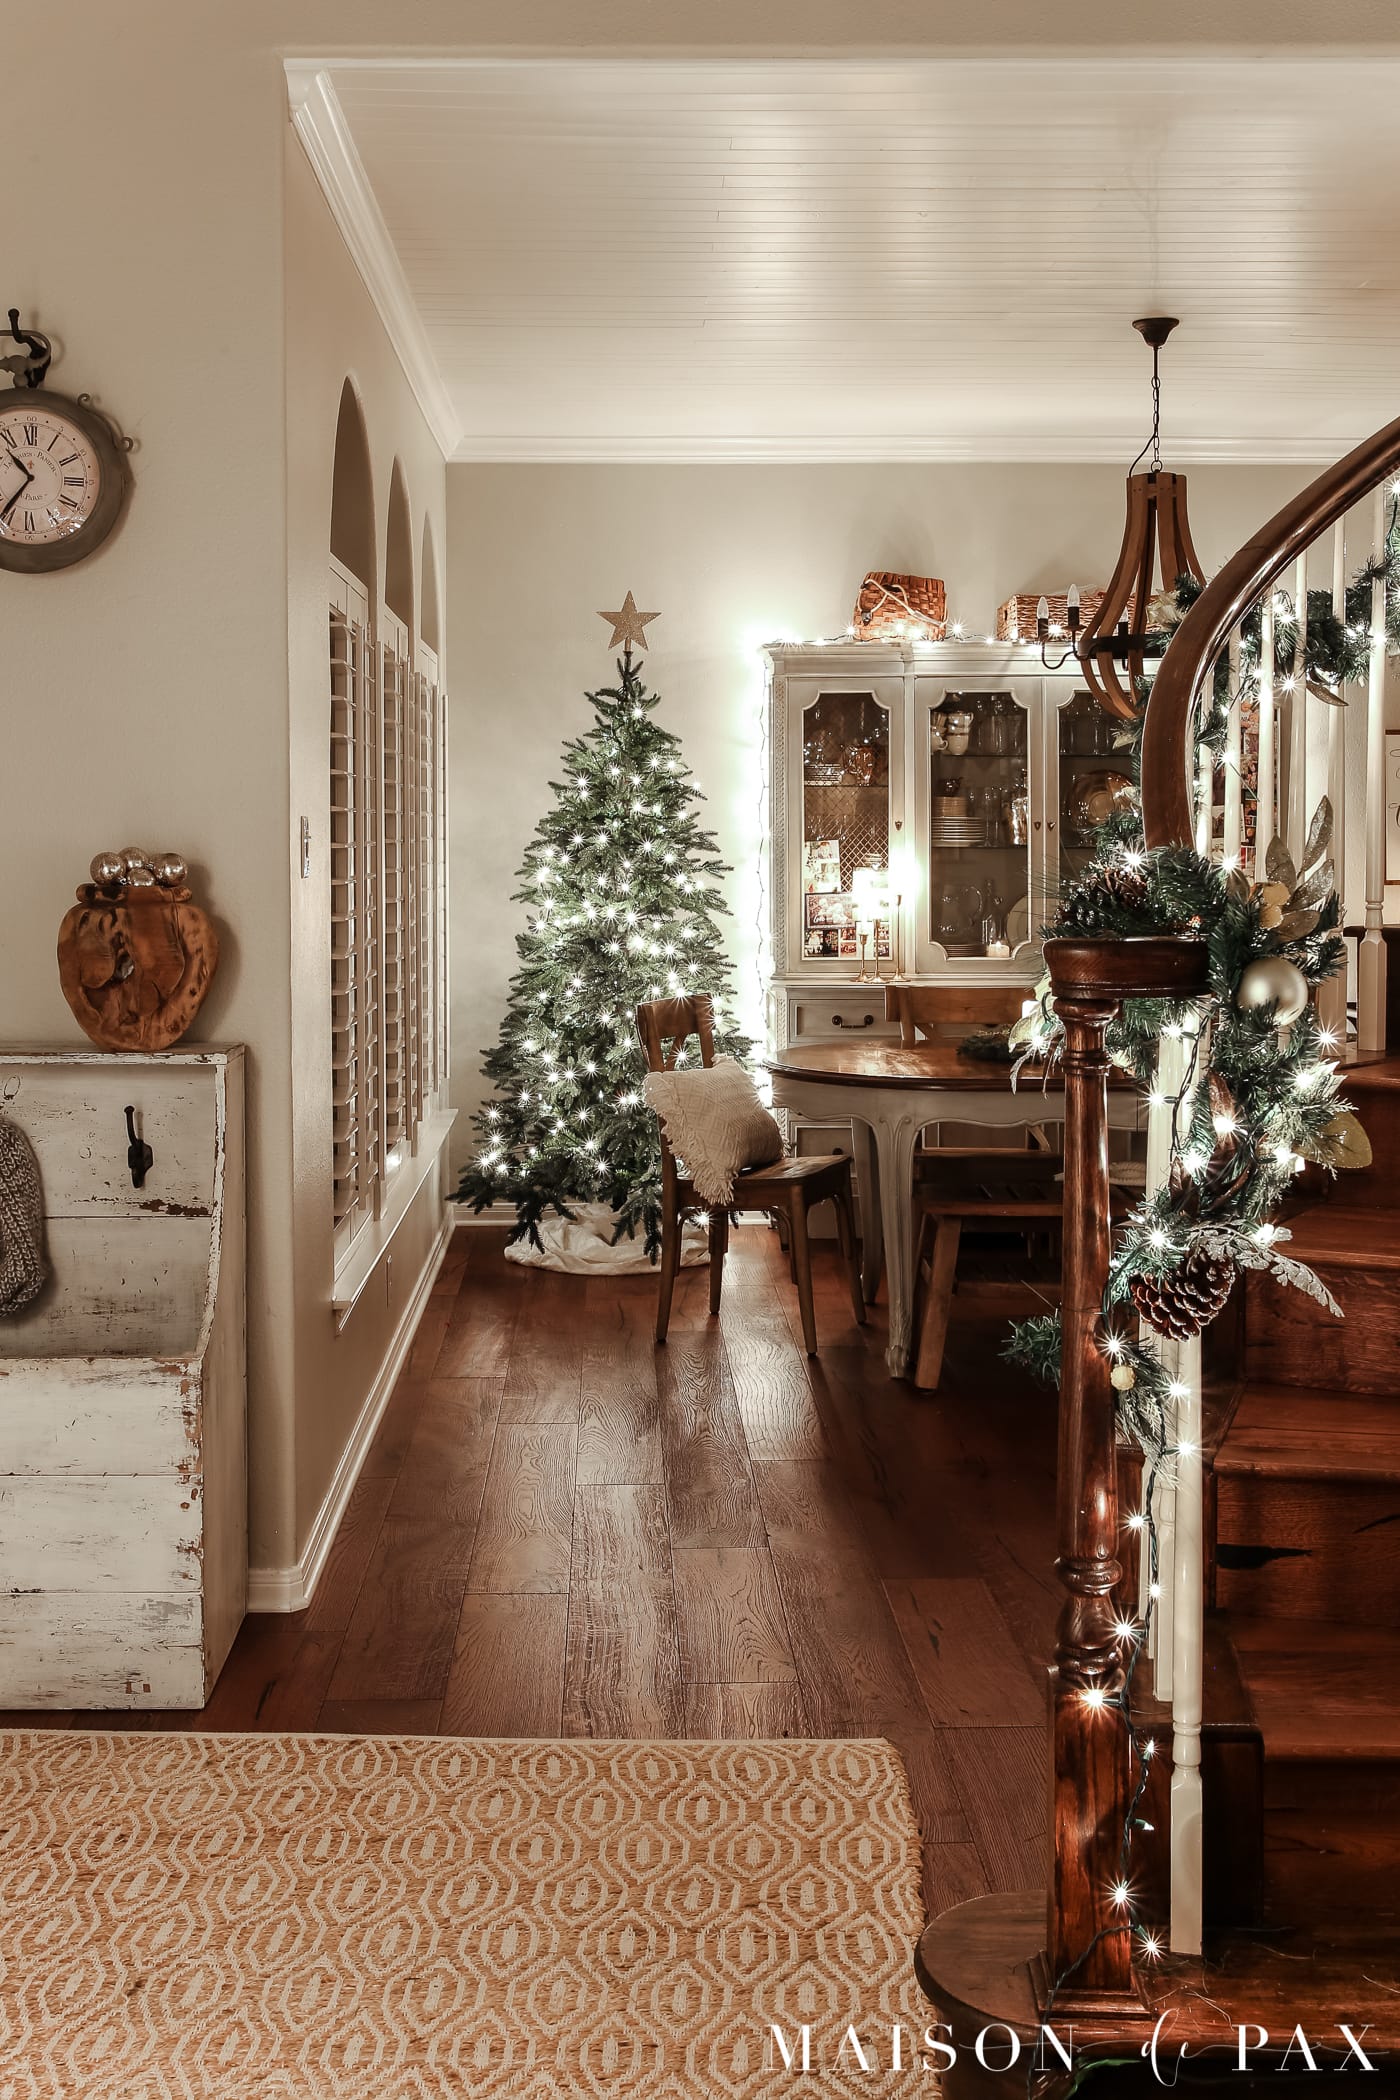 lighted stair garland and naked tree: gorgeous Christmas lights at night in these 25+ home tours #christmasnightstour #holidayhometour #christmaslights